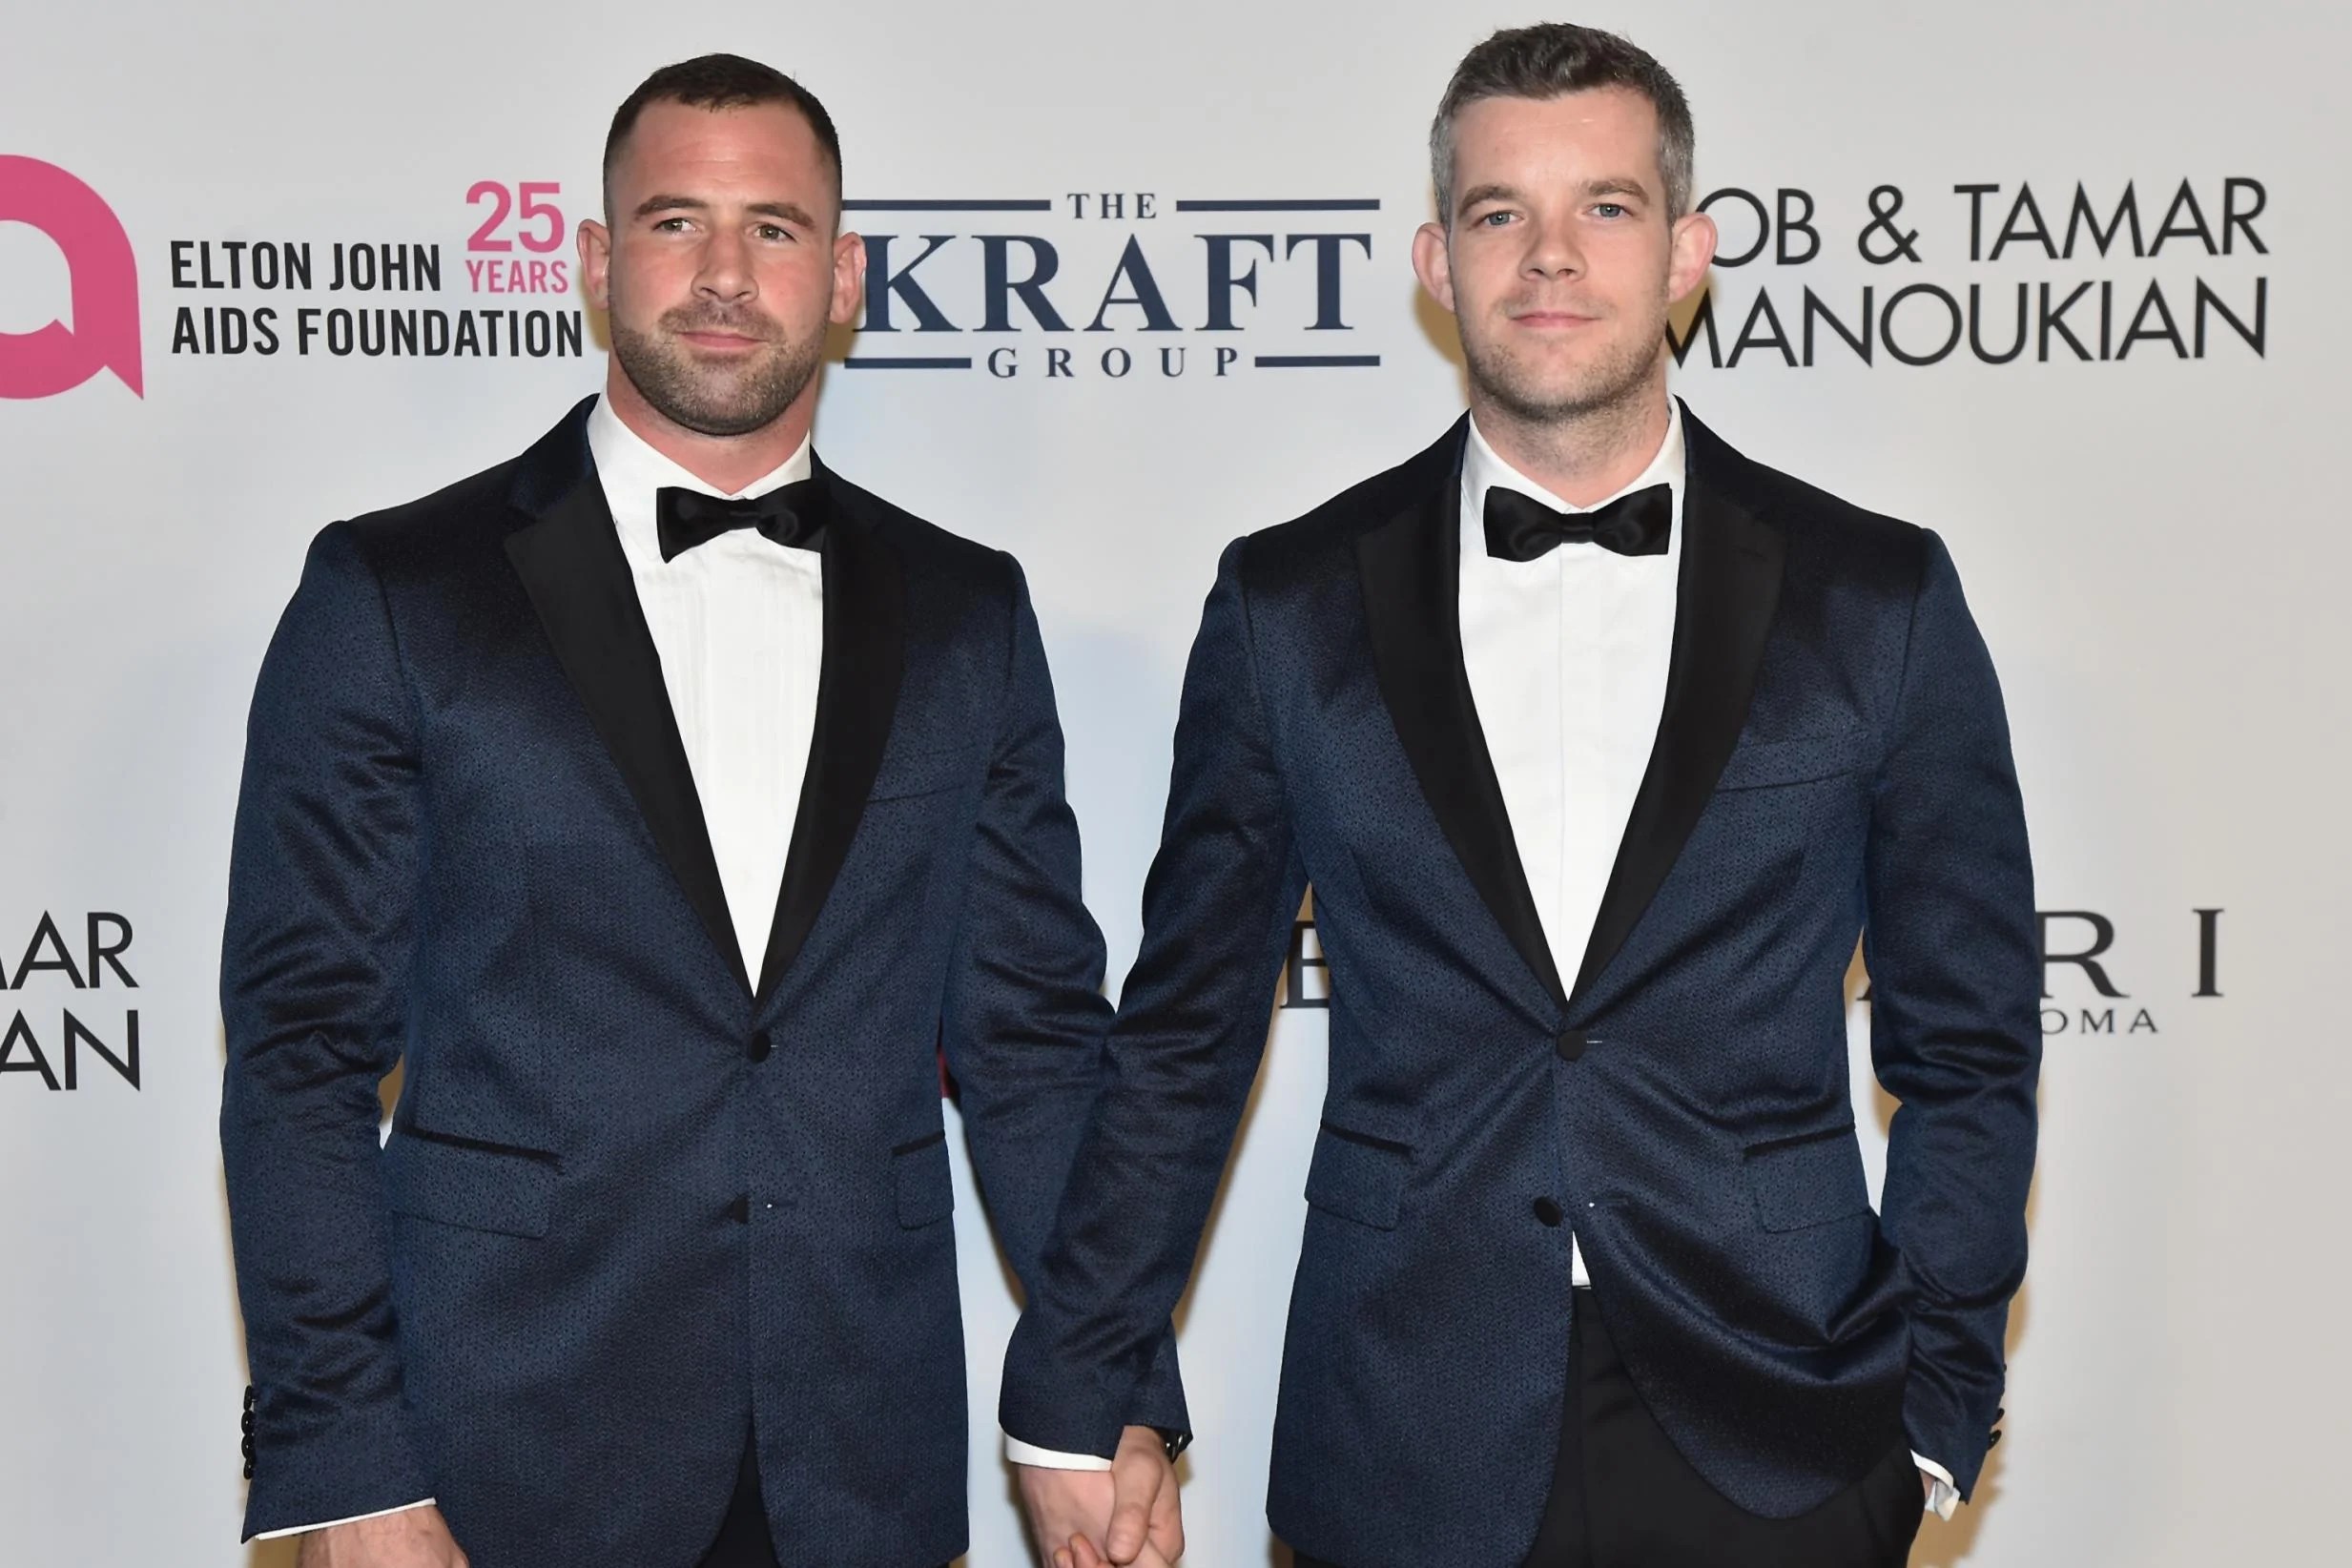 ‘It was completely unexpected’ Russell Tovey confirms engagement to